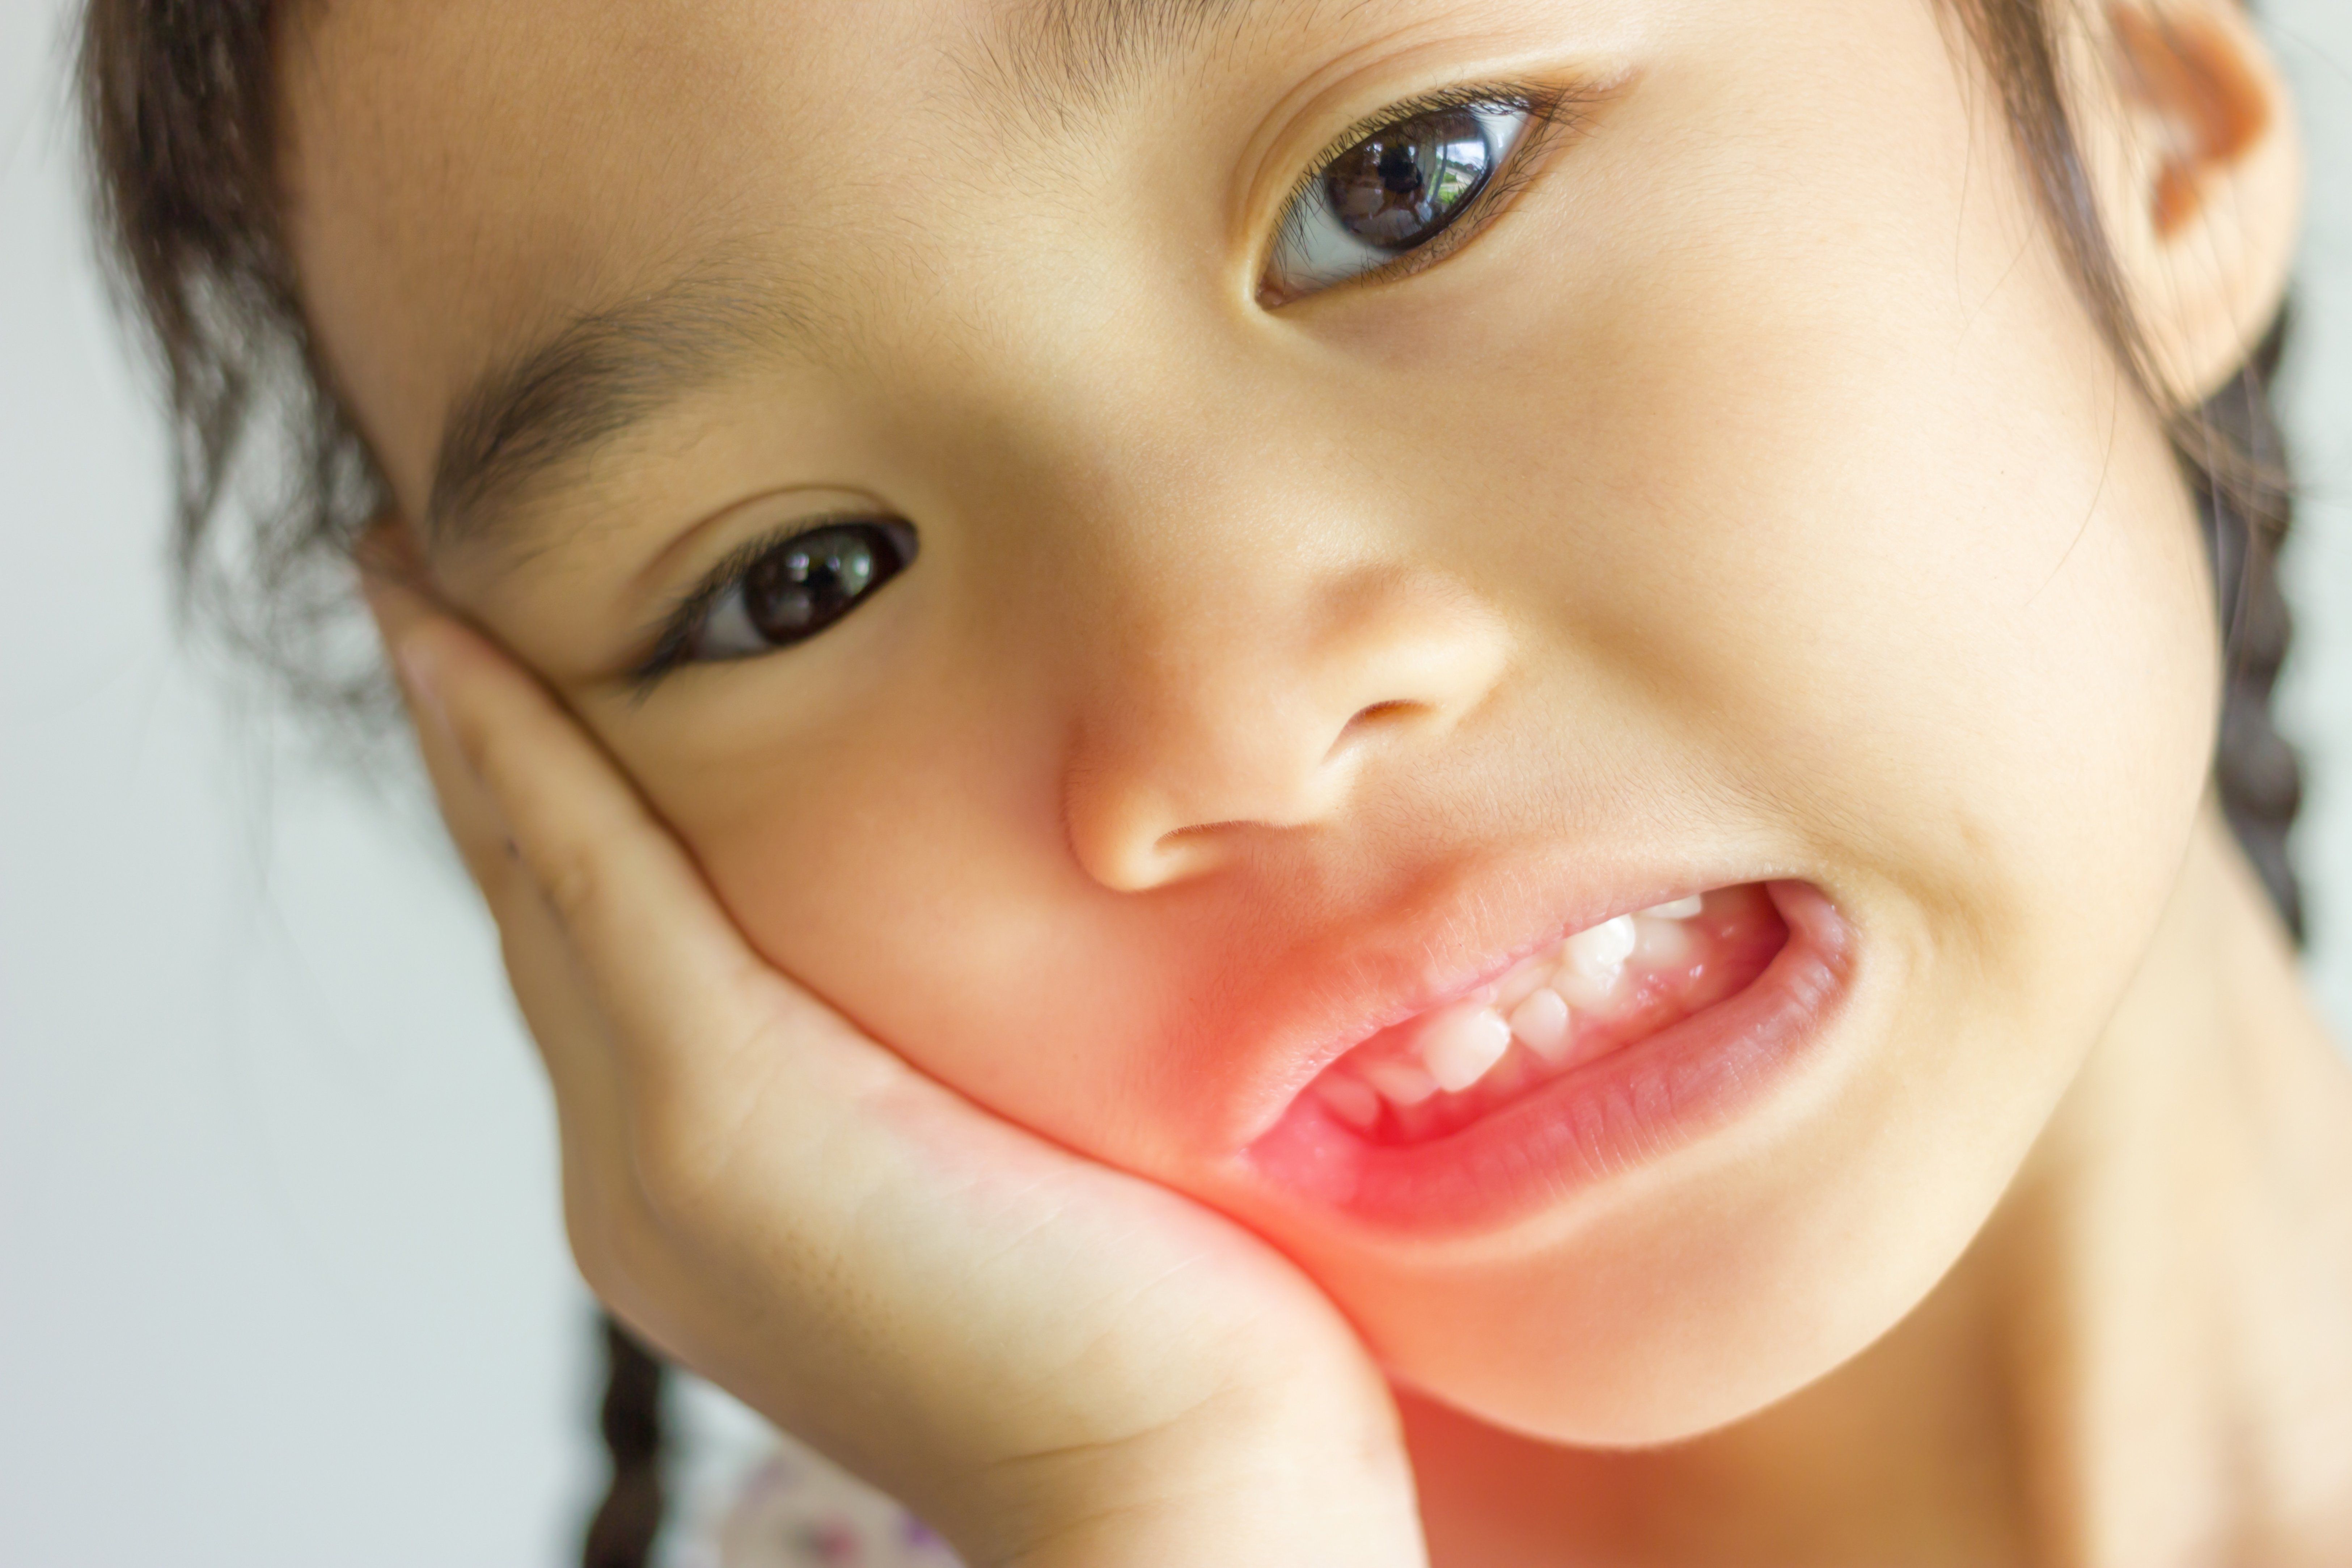 What to Do if Your Kid Gets a Dental Injury